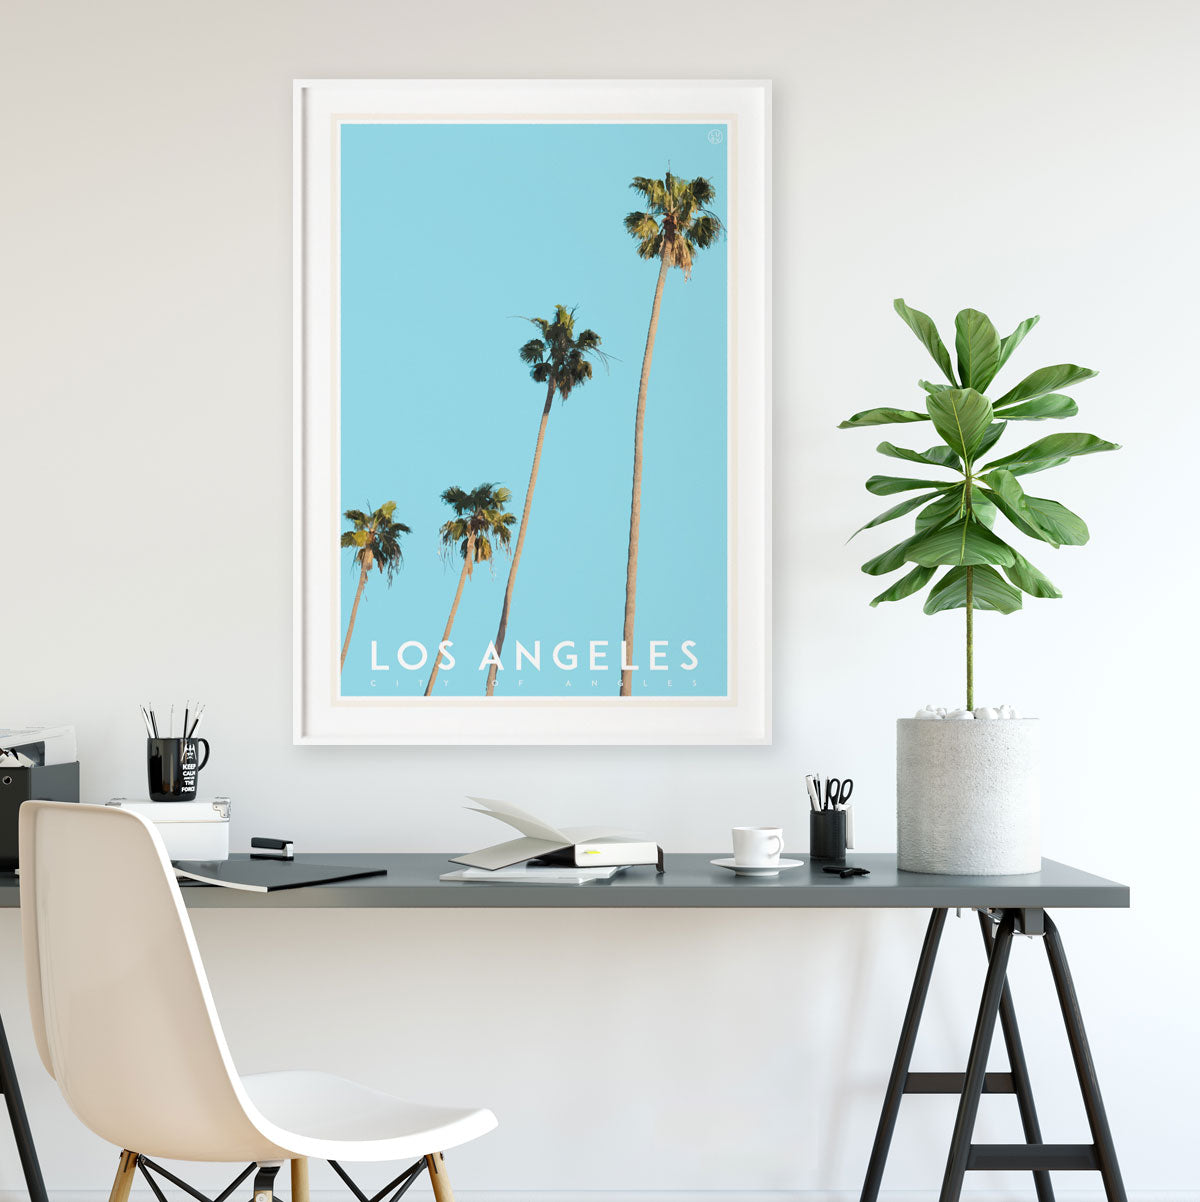 Los Angeles vintage travel style framed print by Placesweluv